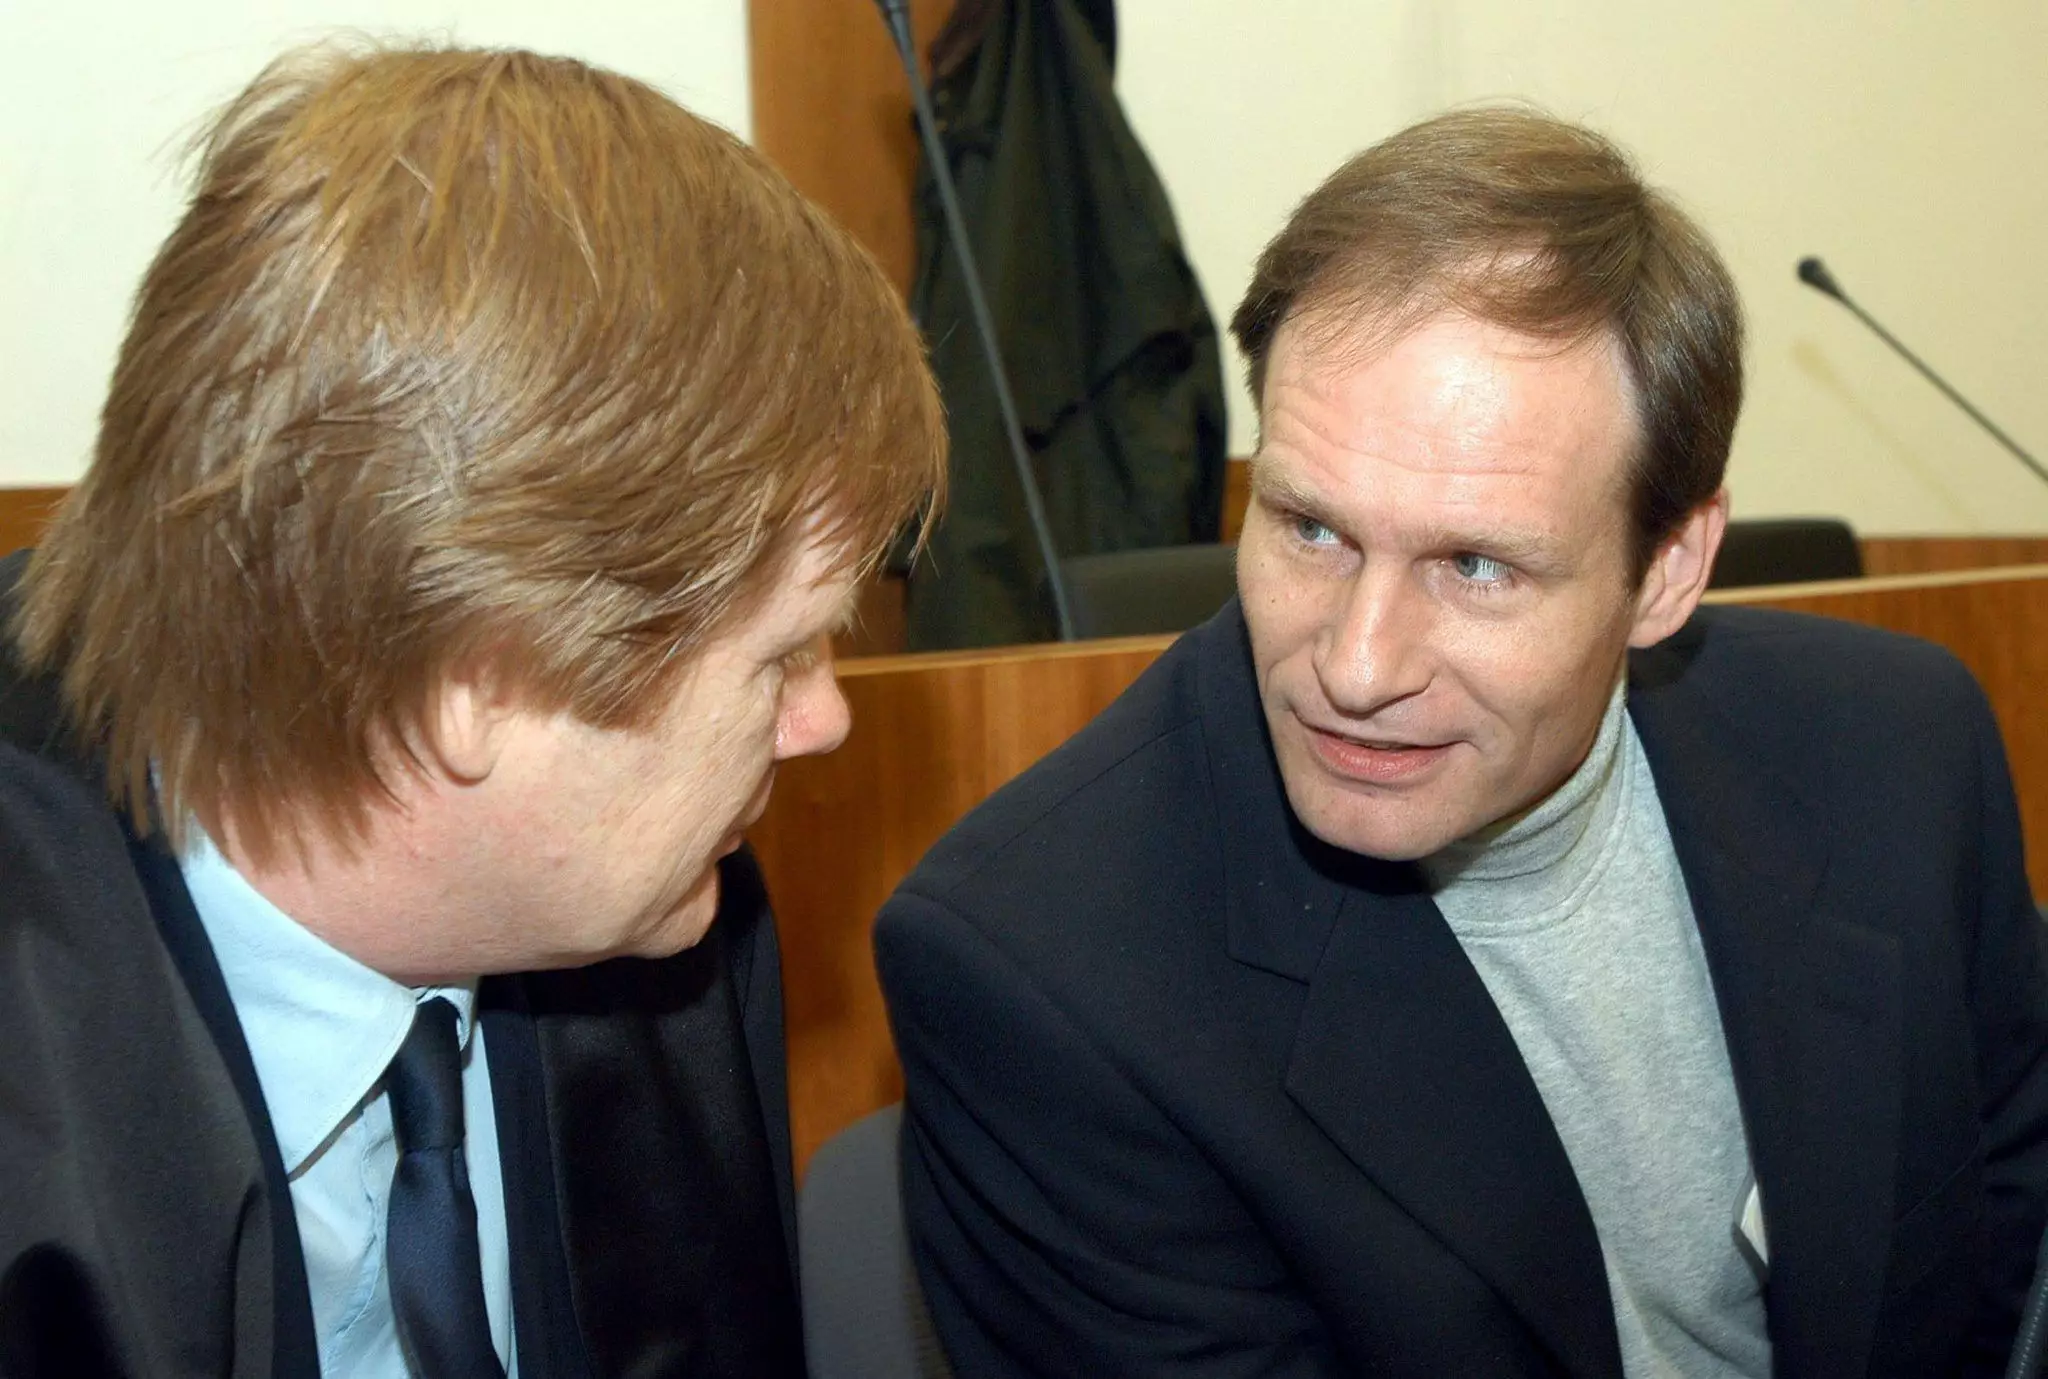 Meiwes was sentenced to life in prison in 2006.